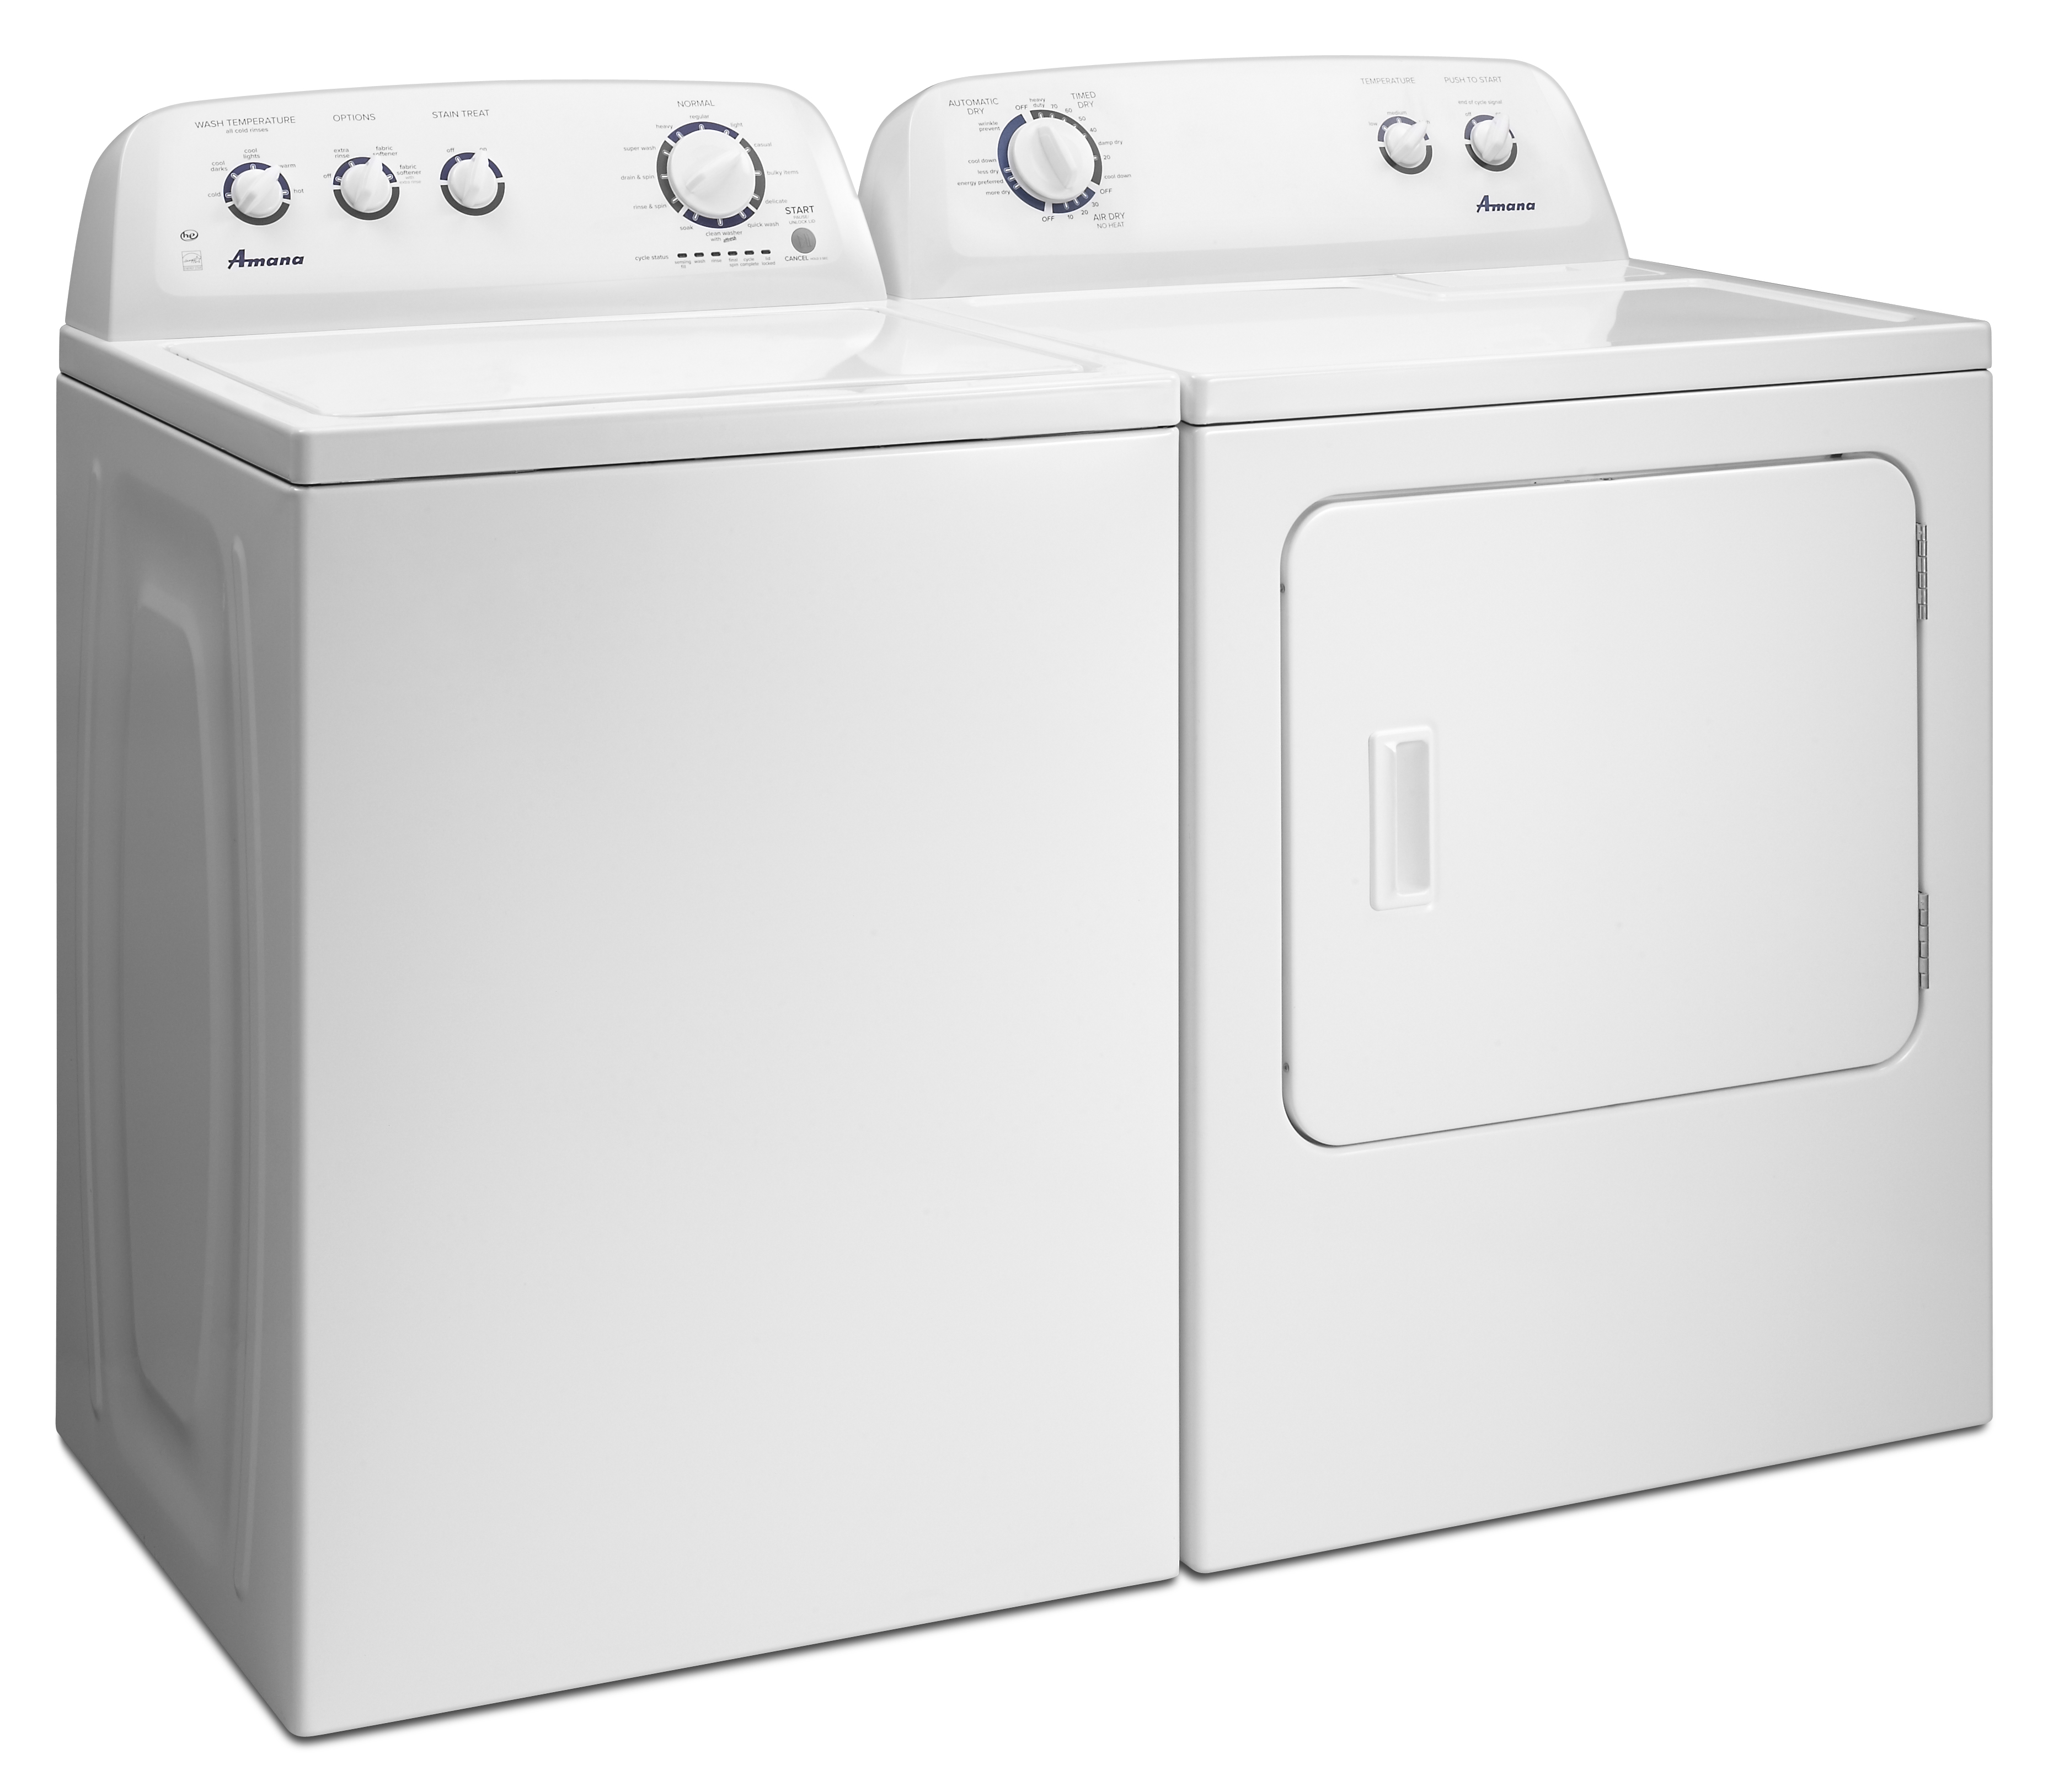 amana-washer-dryer-review-giveaway-tania-reuben